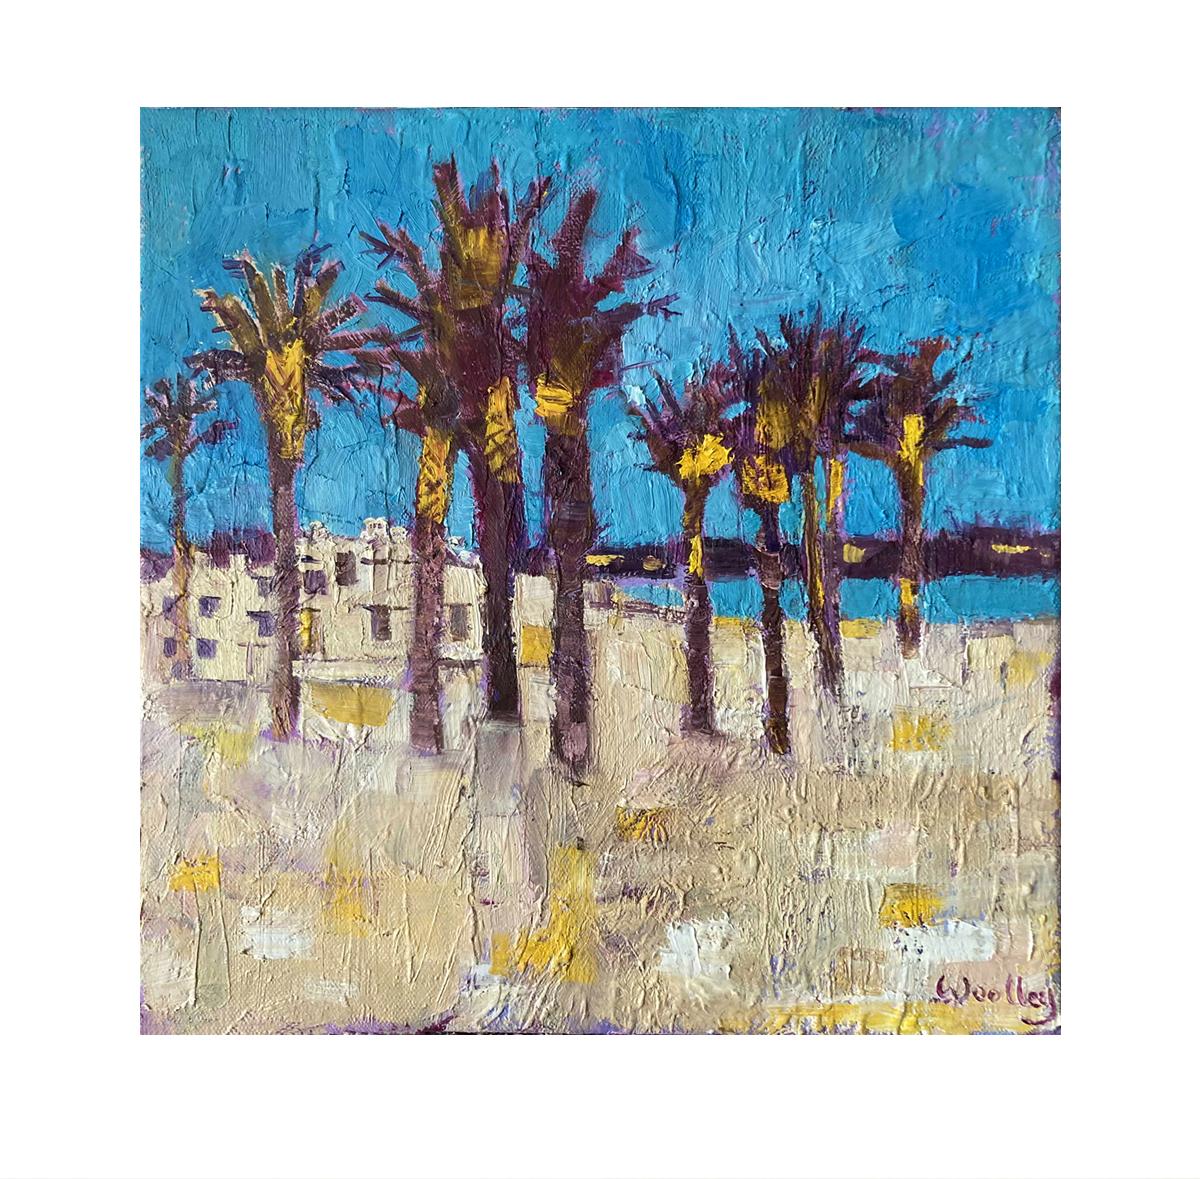 Beach Palms La Cala By Eleanor Woolley [April 2023]

Palm Trees La Cala is an Original Painting by Eleanor Woolley. The striking Palm Trees on La Cala beach in La Cala de Mijas were the inspiration for this Painting. The sea reflects the Phthalo